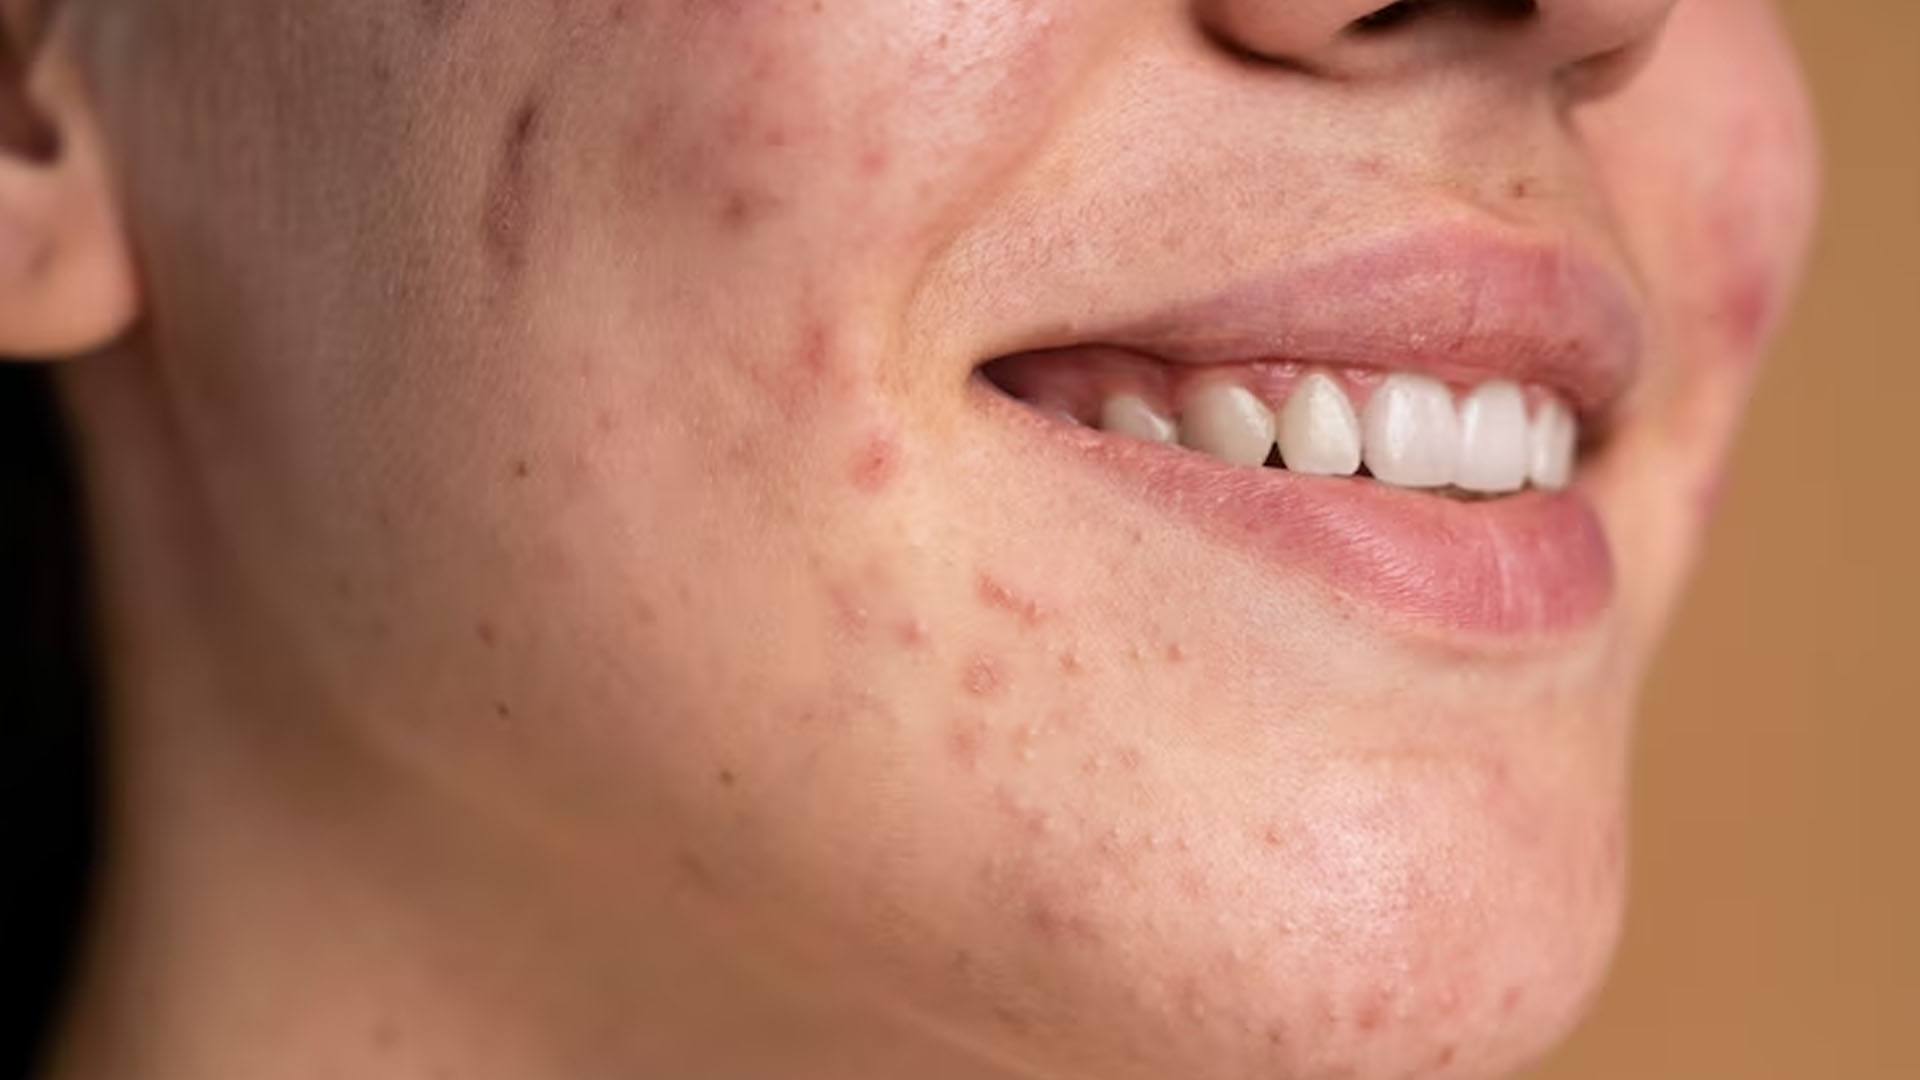 What are the Home Remedies for Clogged Pores?